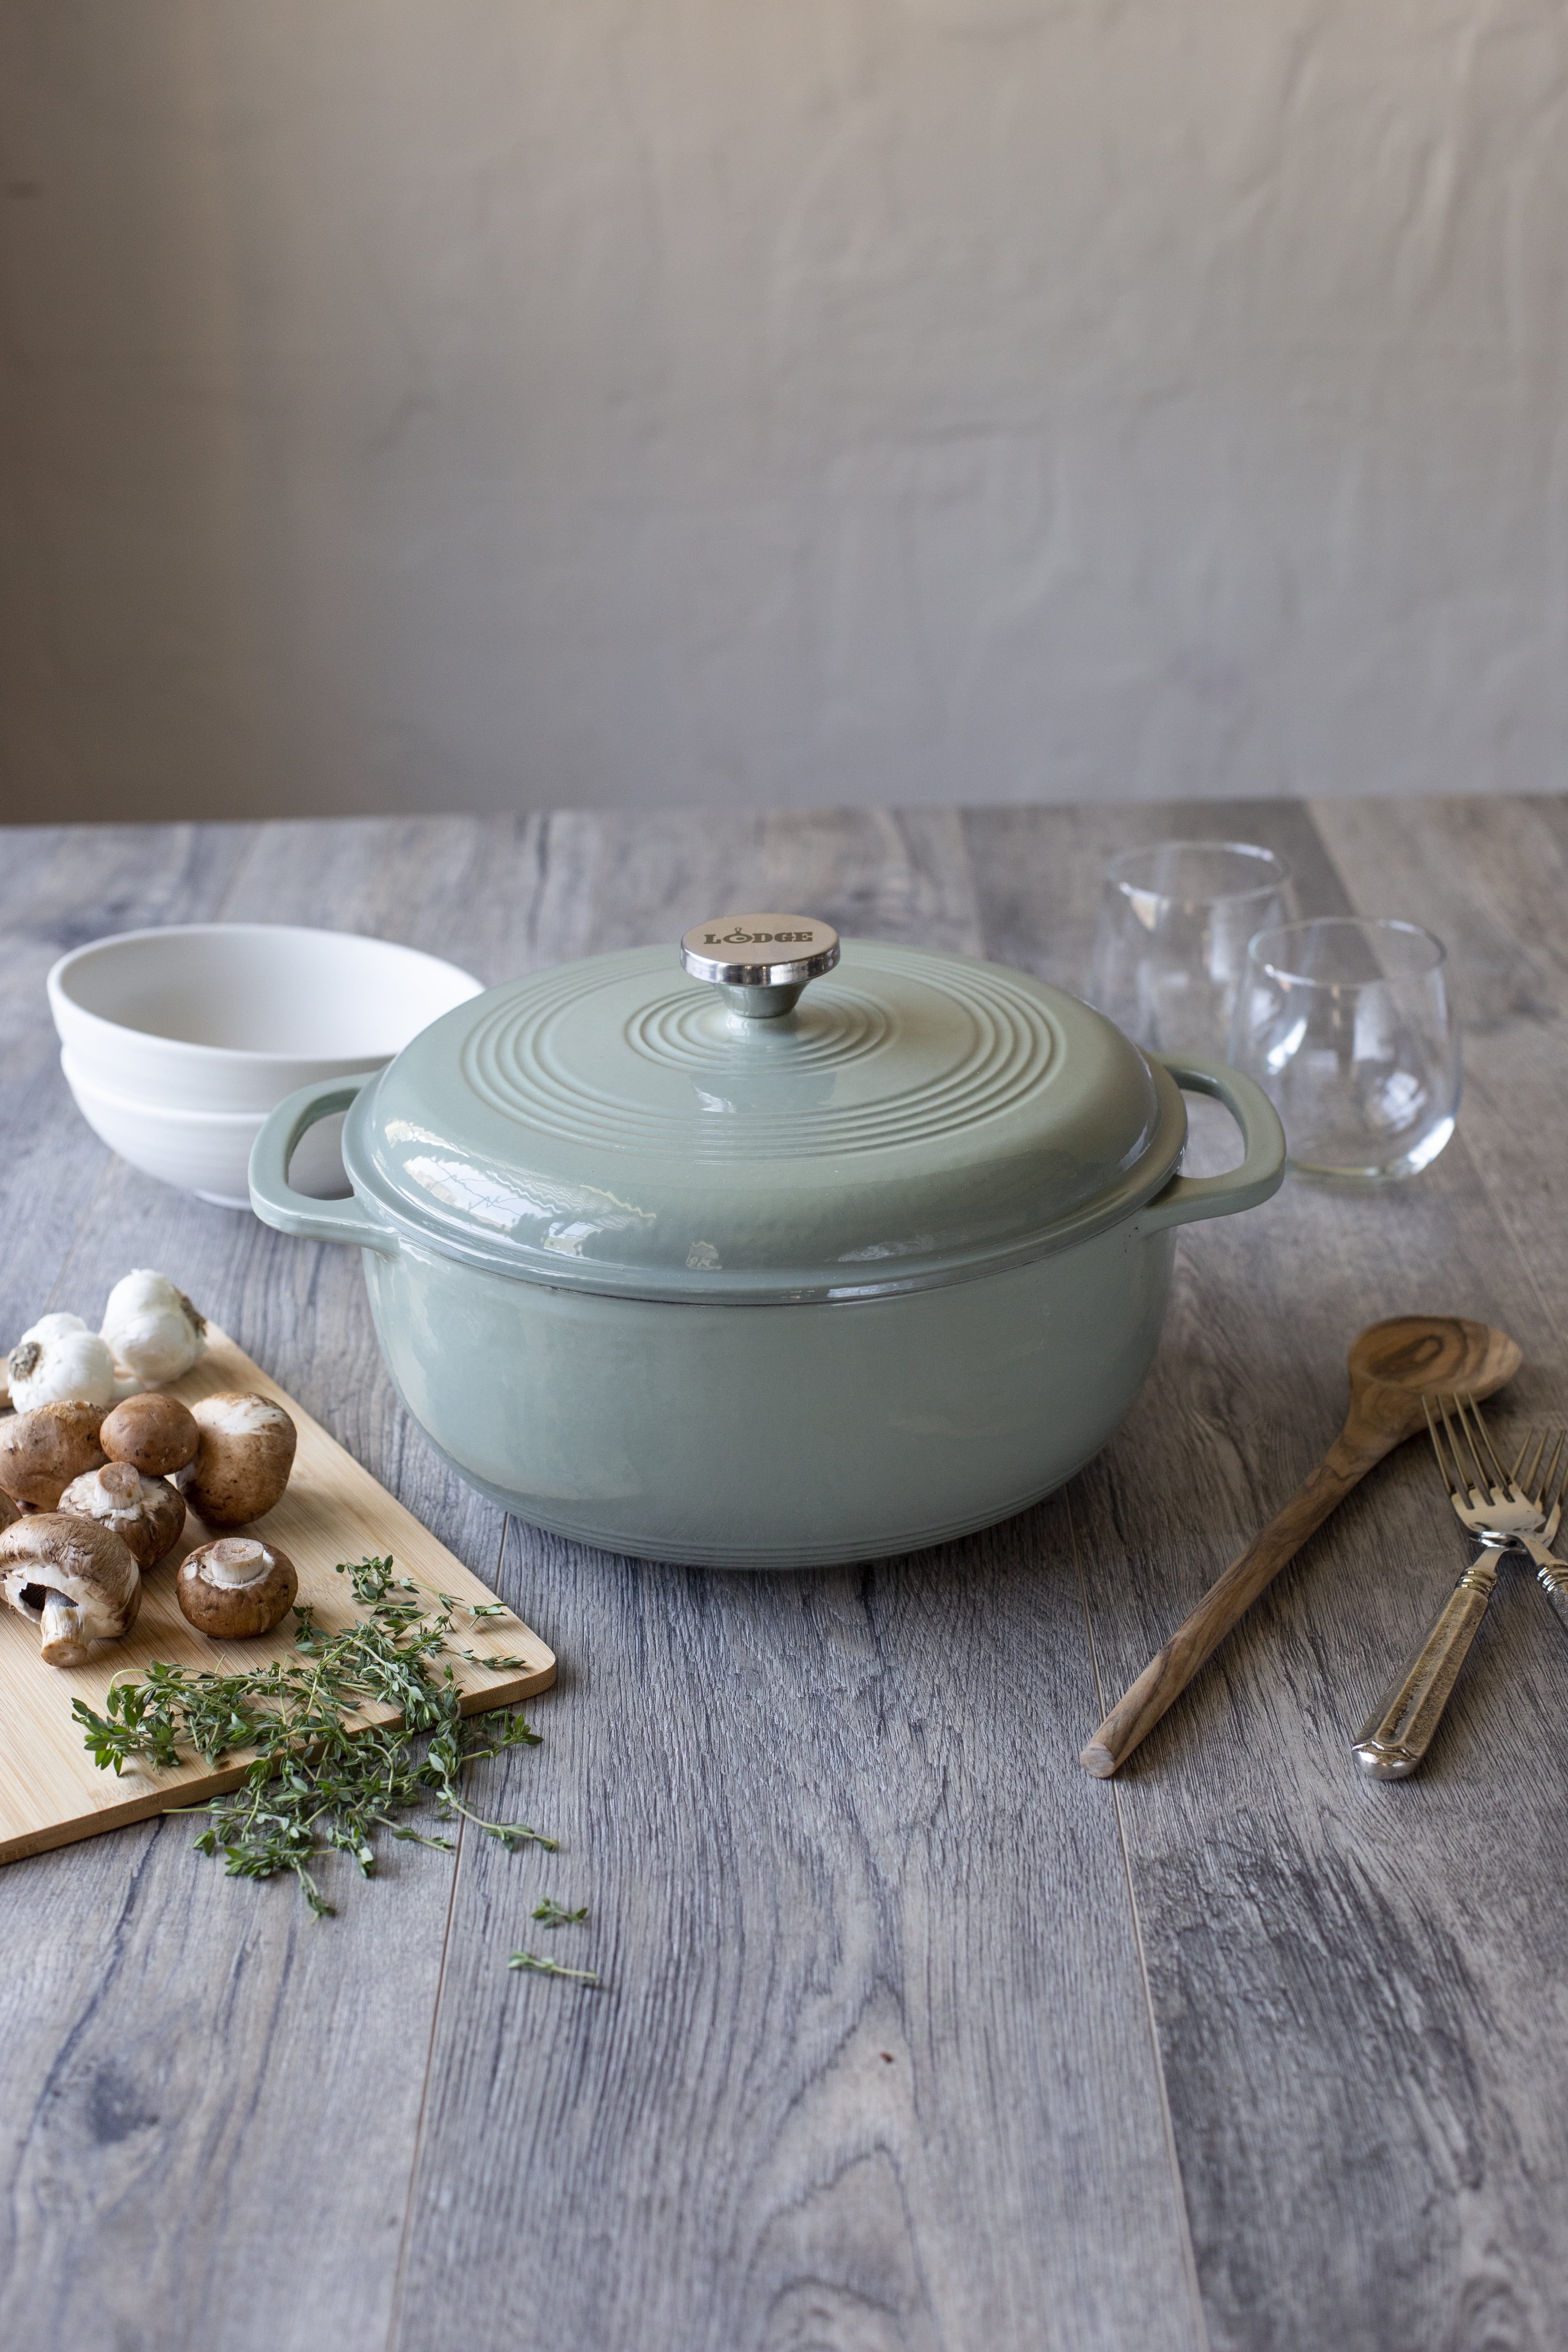 Review: Why the Lodge Cast Iron Dutch Oven is worth the buy